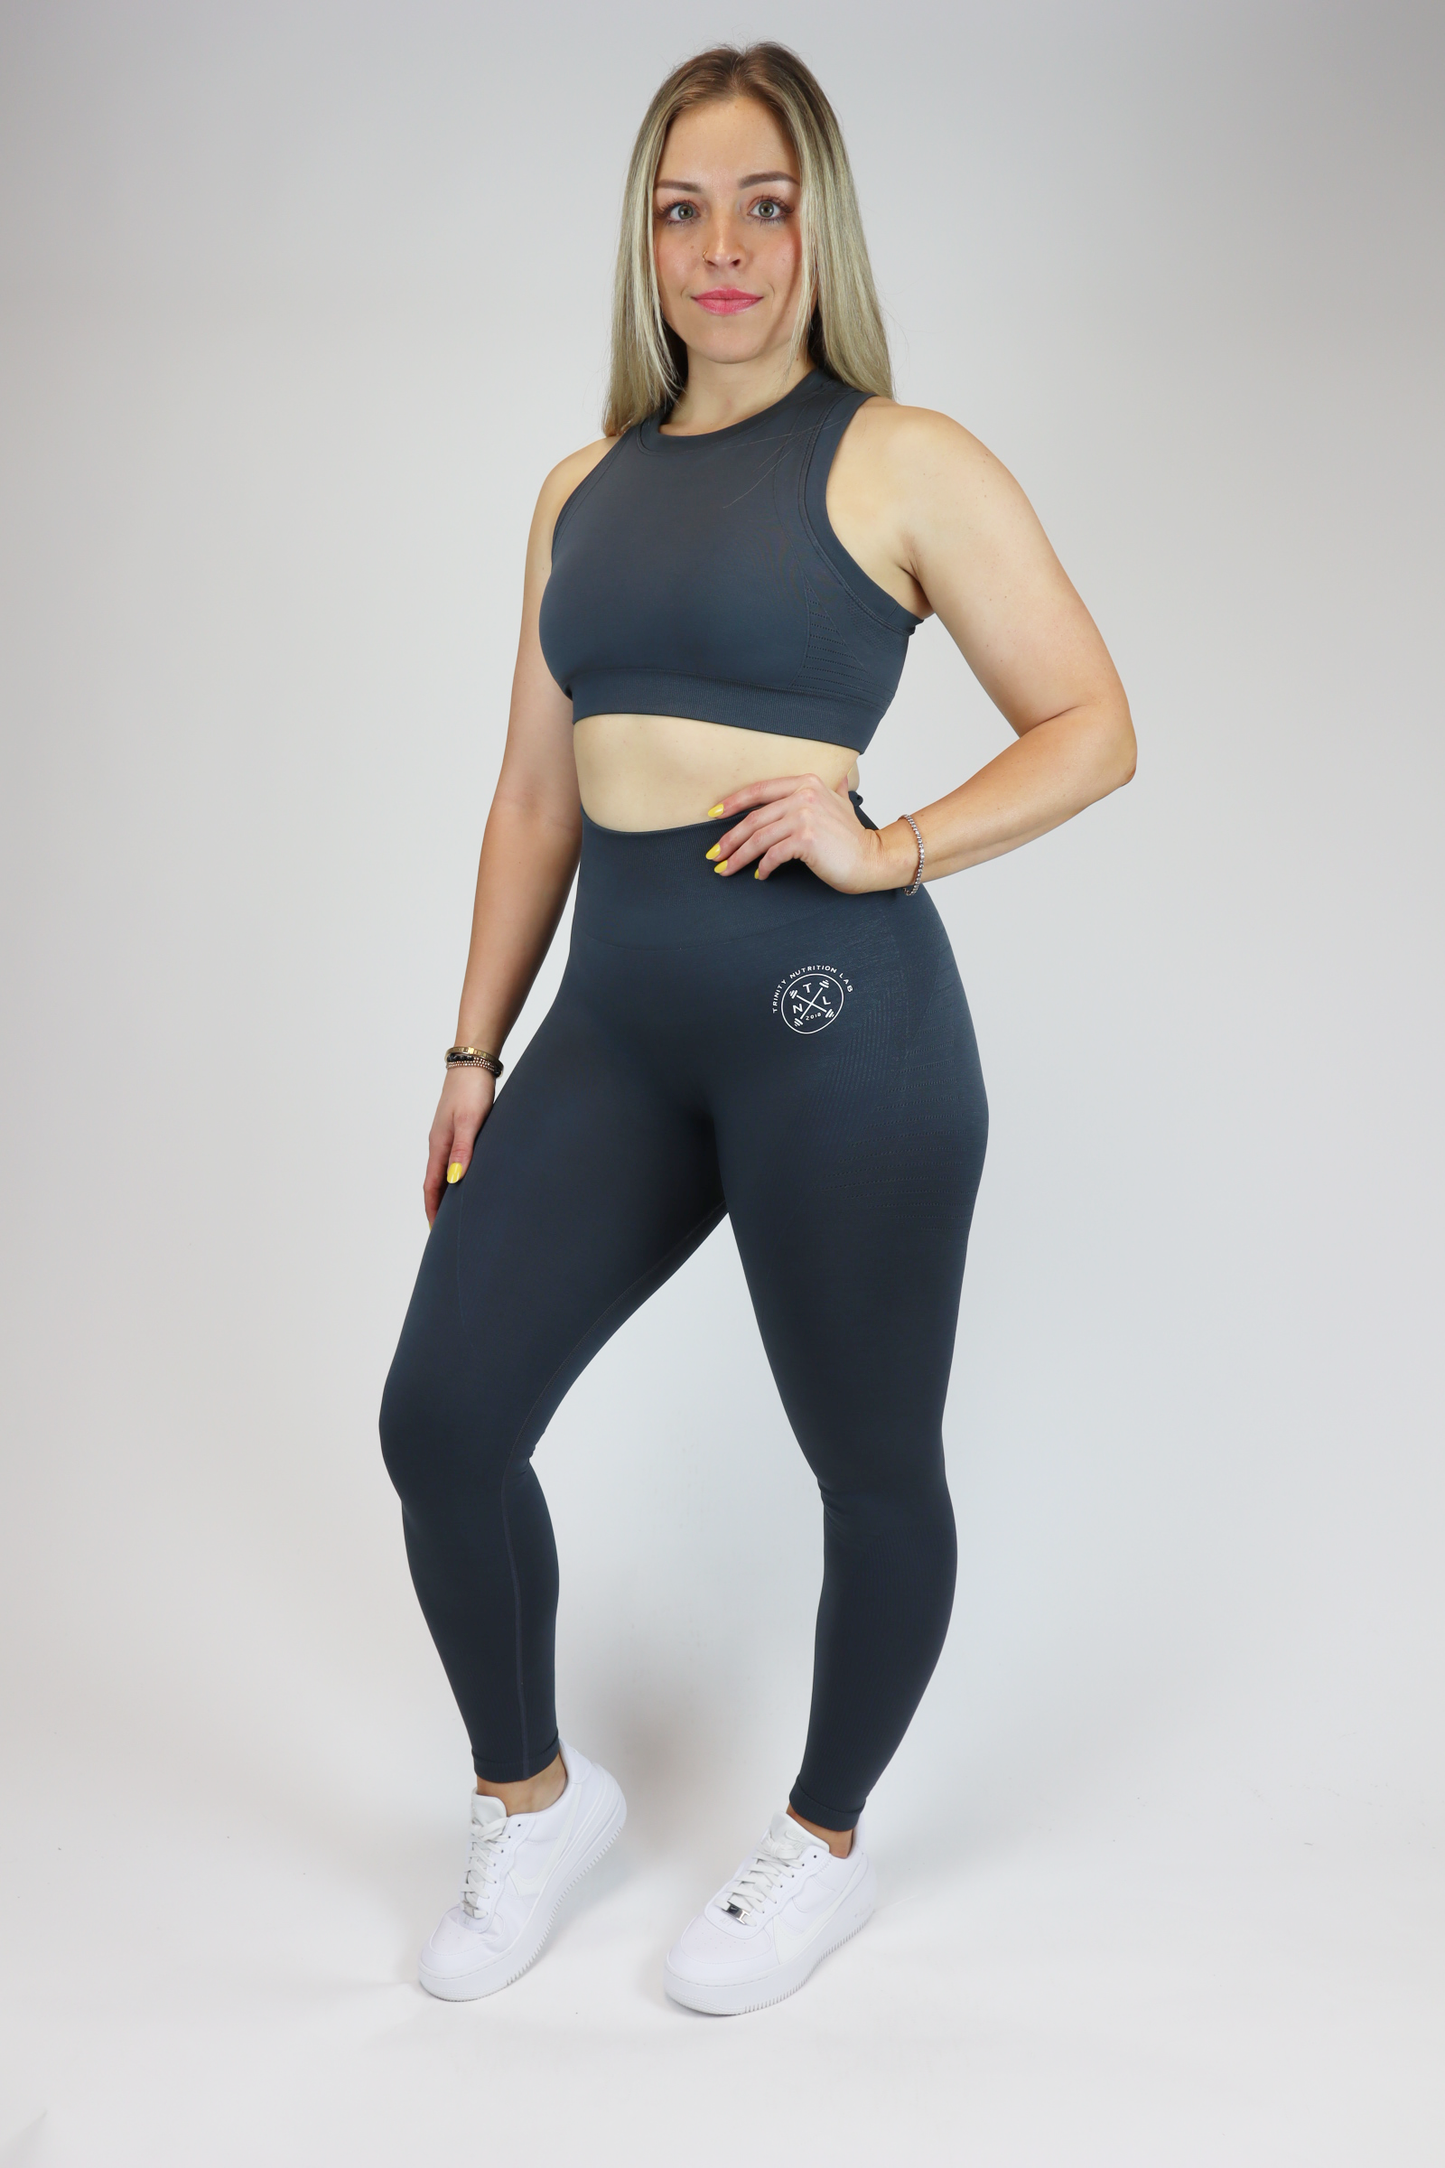 most comfortable leggings for a workout or hangout